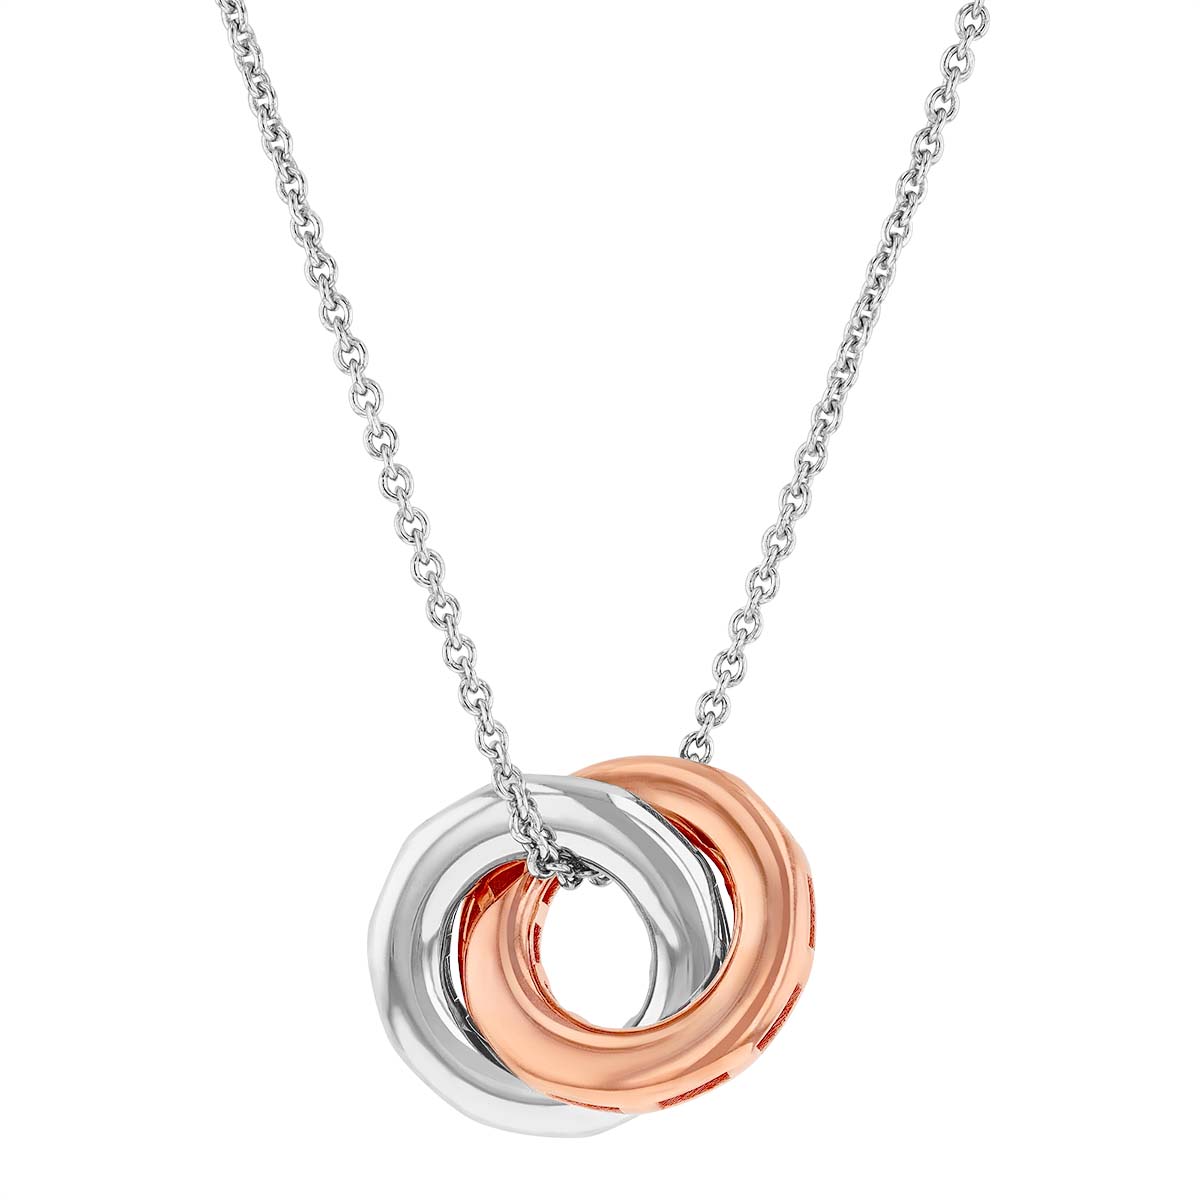 Pesavento Elegance Rose Tone & Sterling Silver Intertwined Circle ...